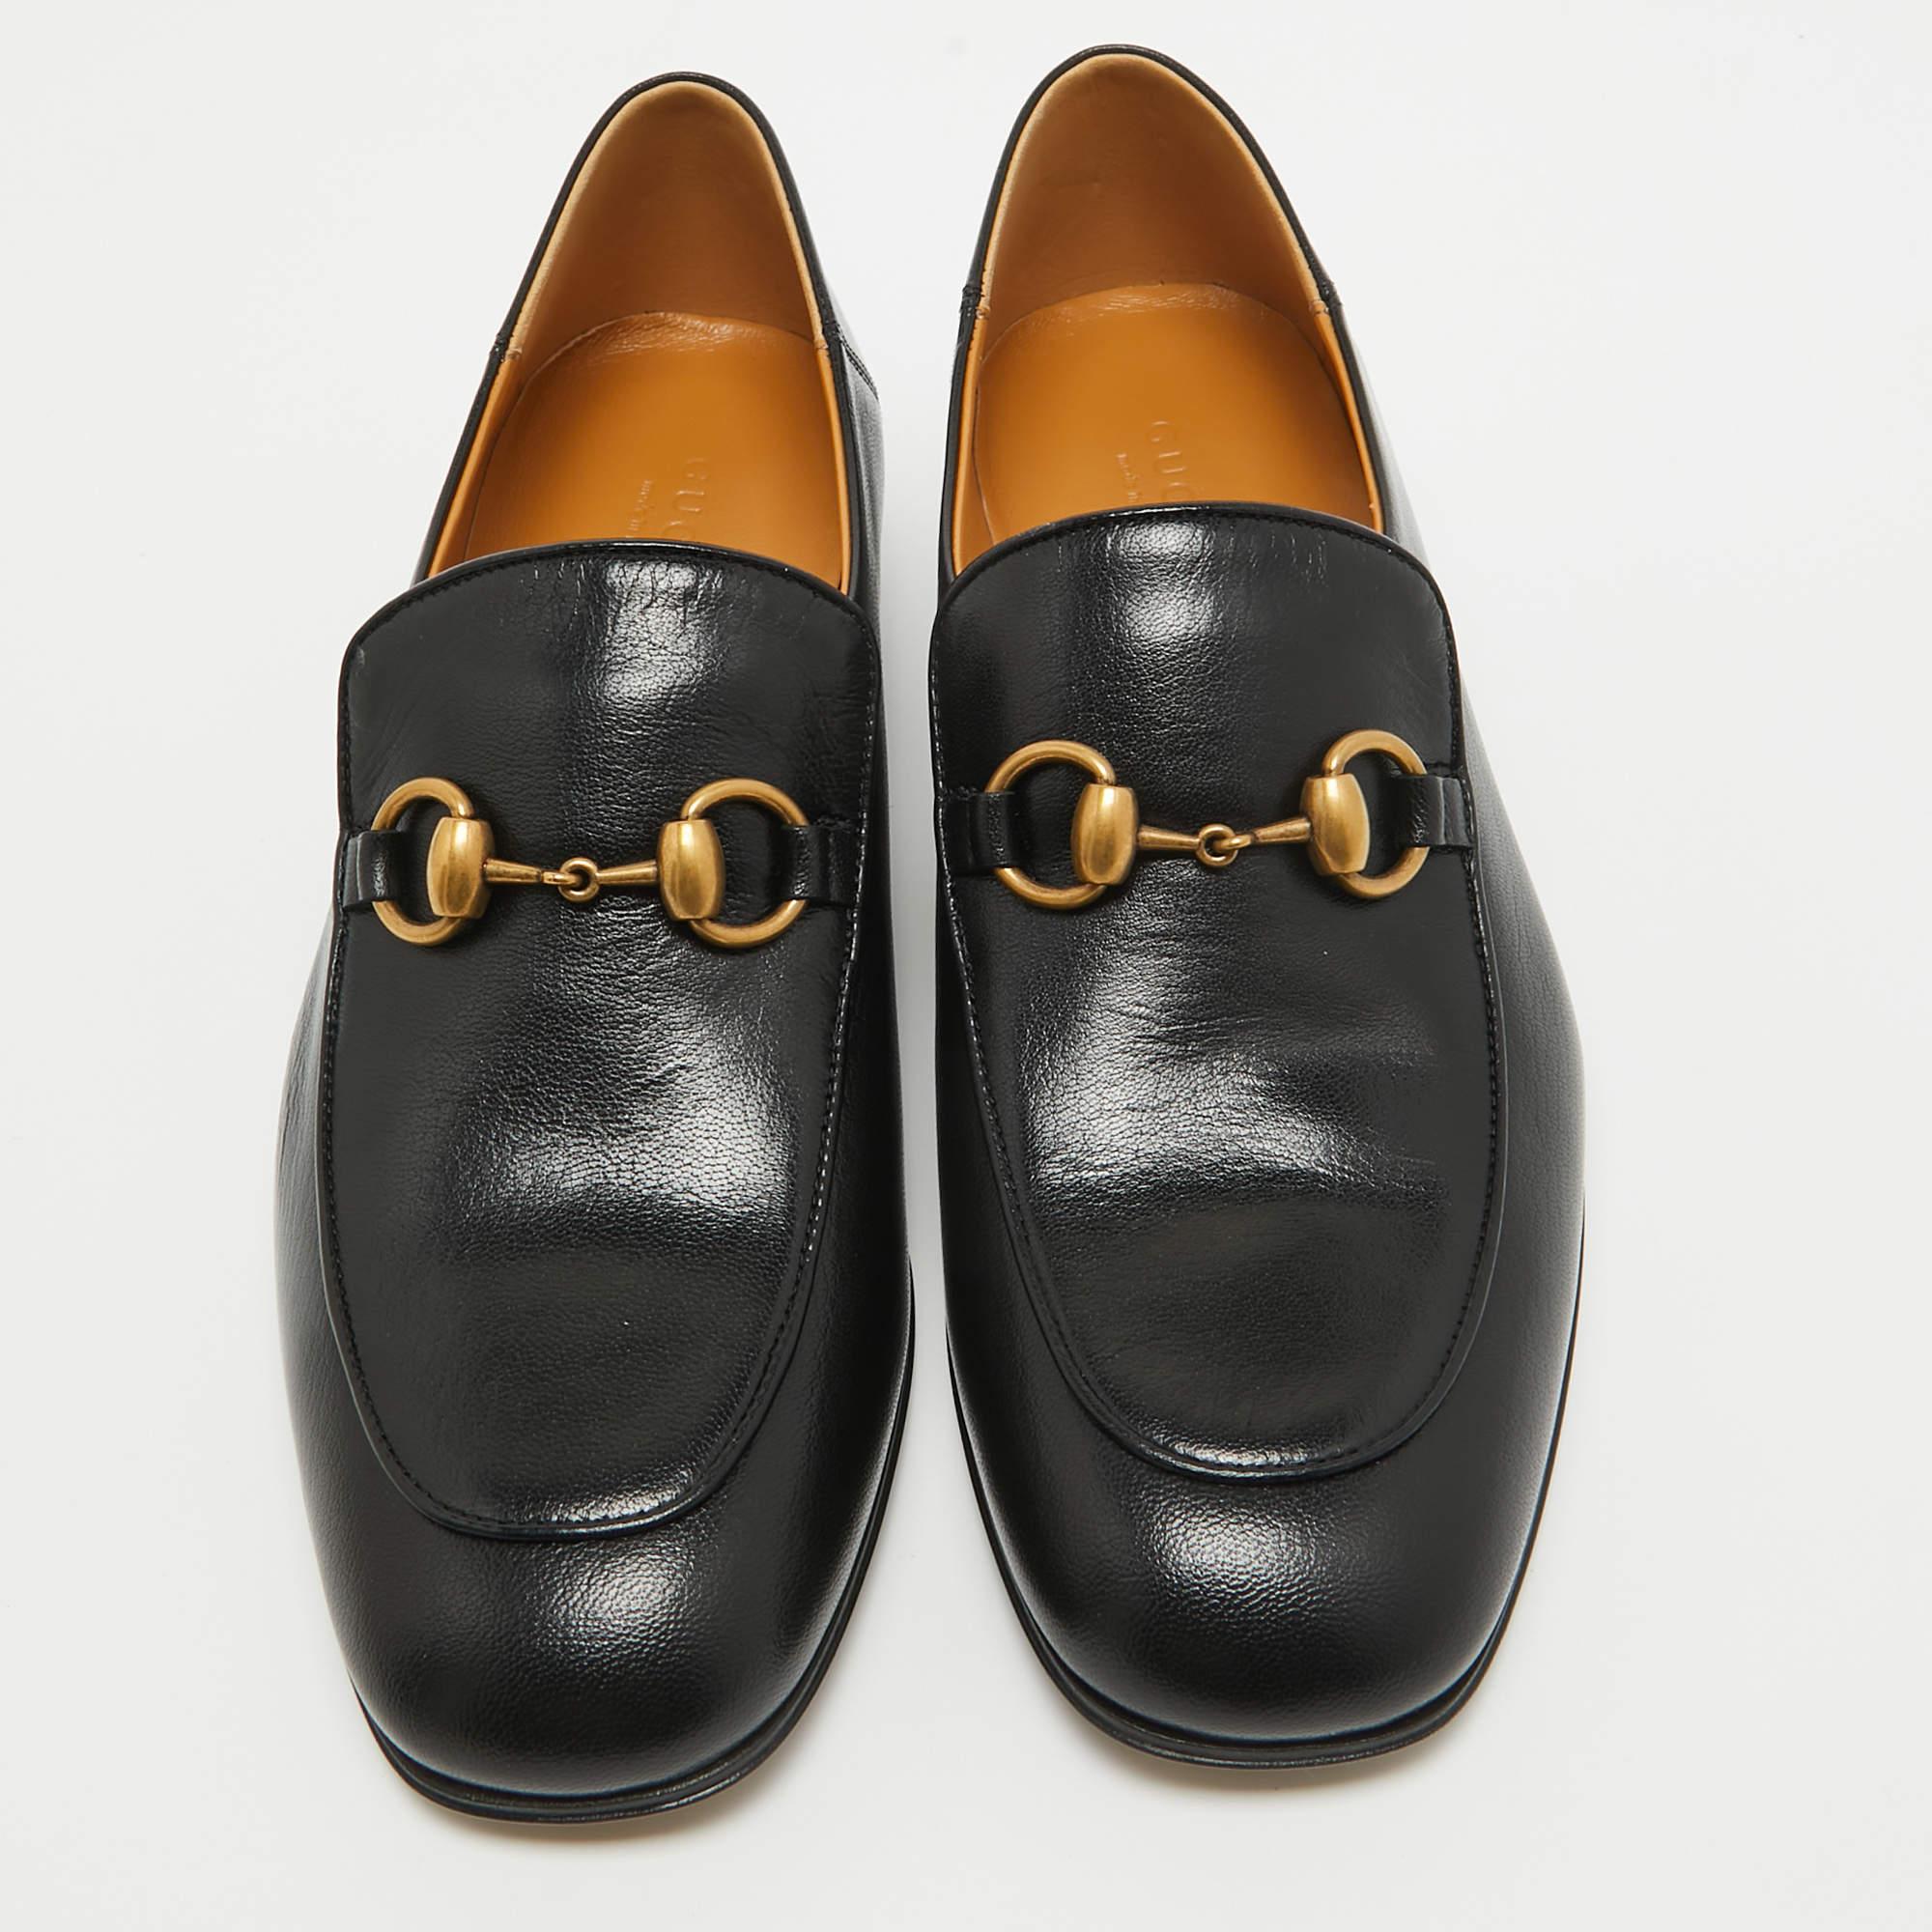 Let comfort and classic style be yours with these Gucci loafers. Crafted with skill, the high-quality shoes have the perfect construction to take you through the day with utmost ease.

Includes: Original Dustbag, Original Box, Info Booklet

